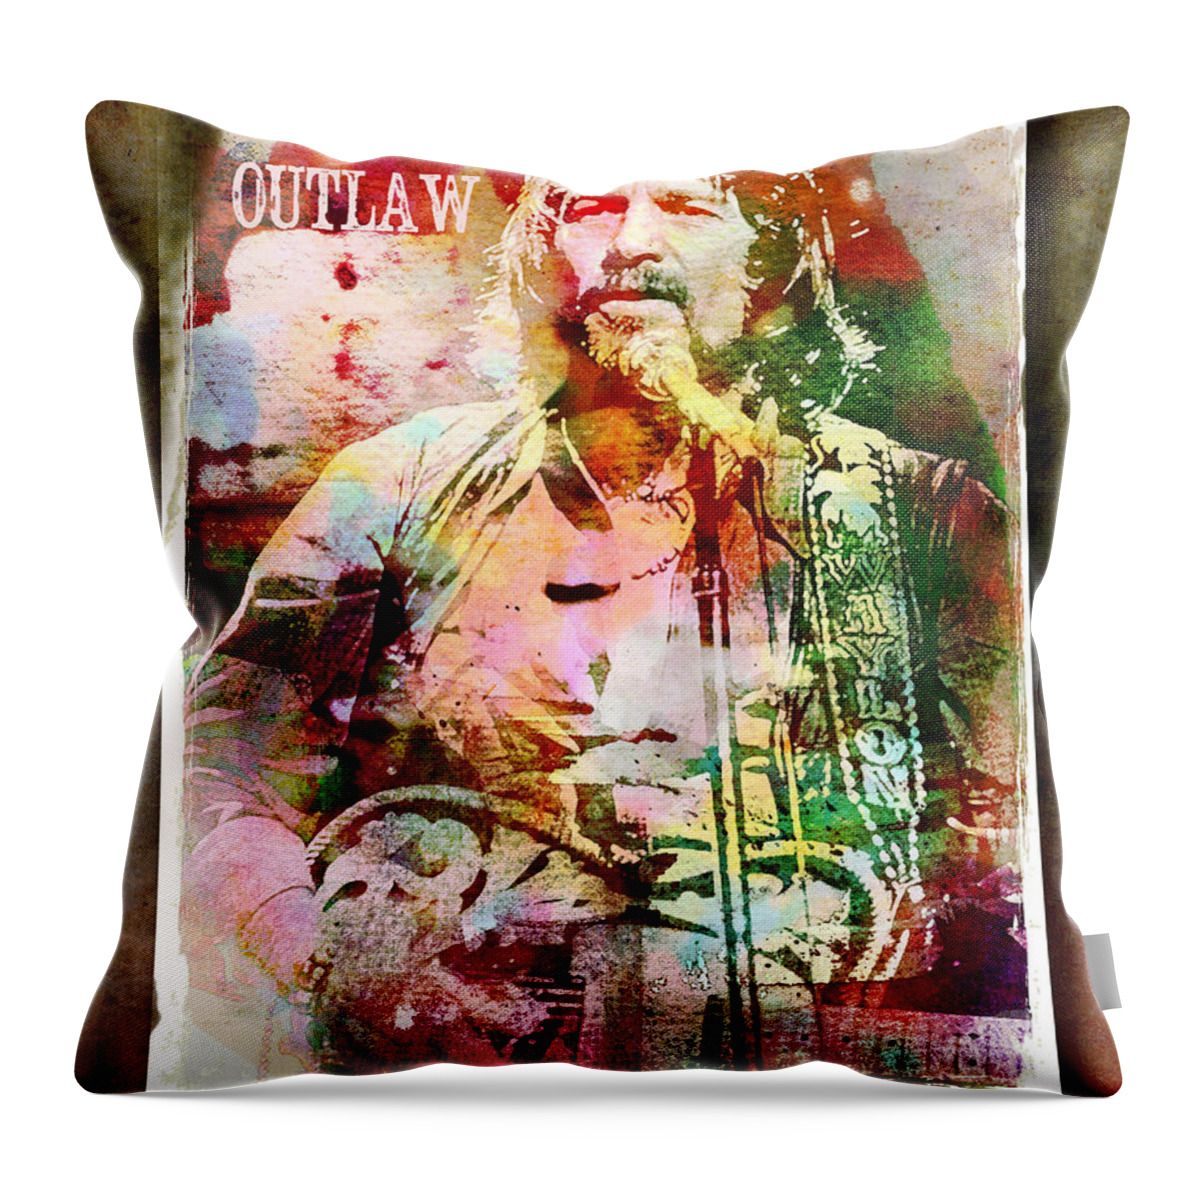 Waylon Jennings Throw Pillow featuring the digital art Outlaw by Mal Bray